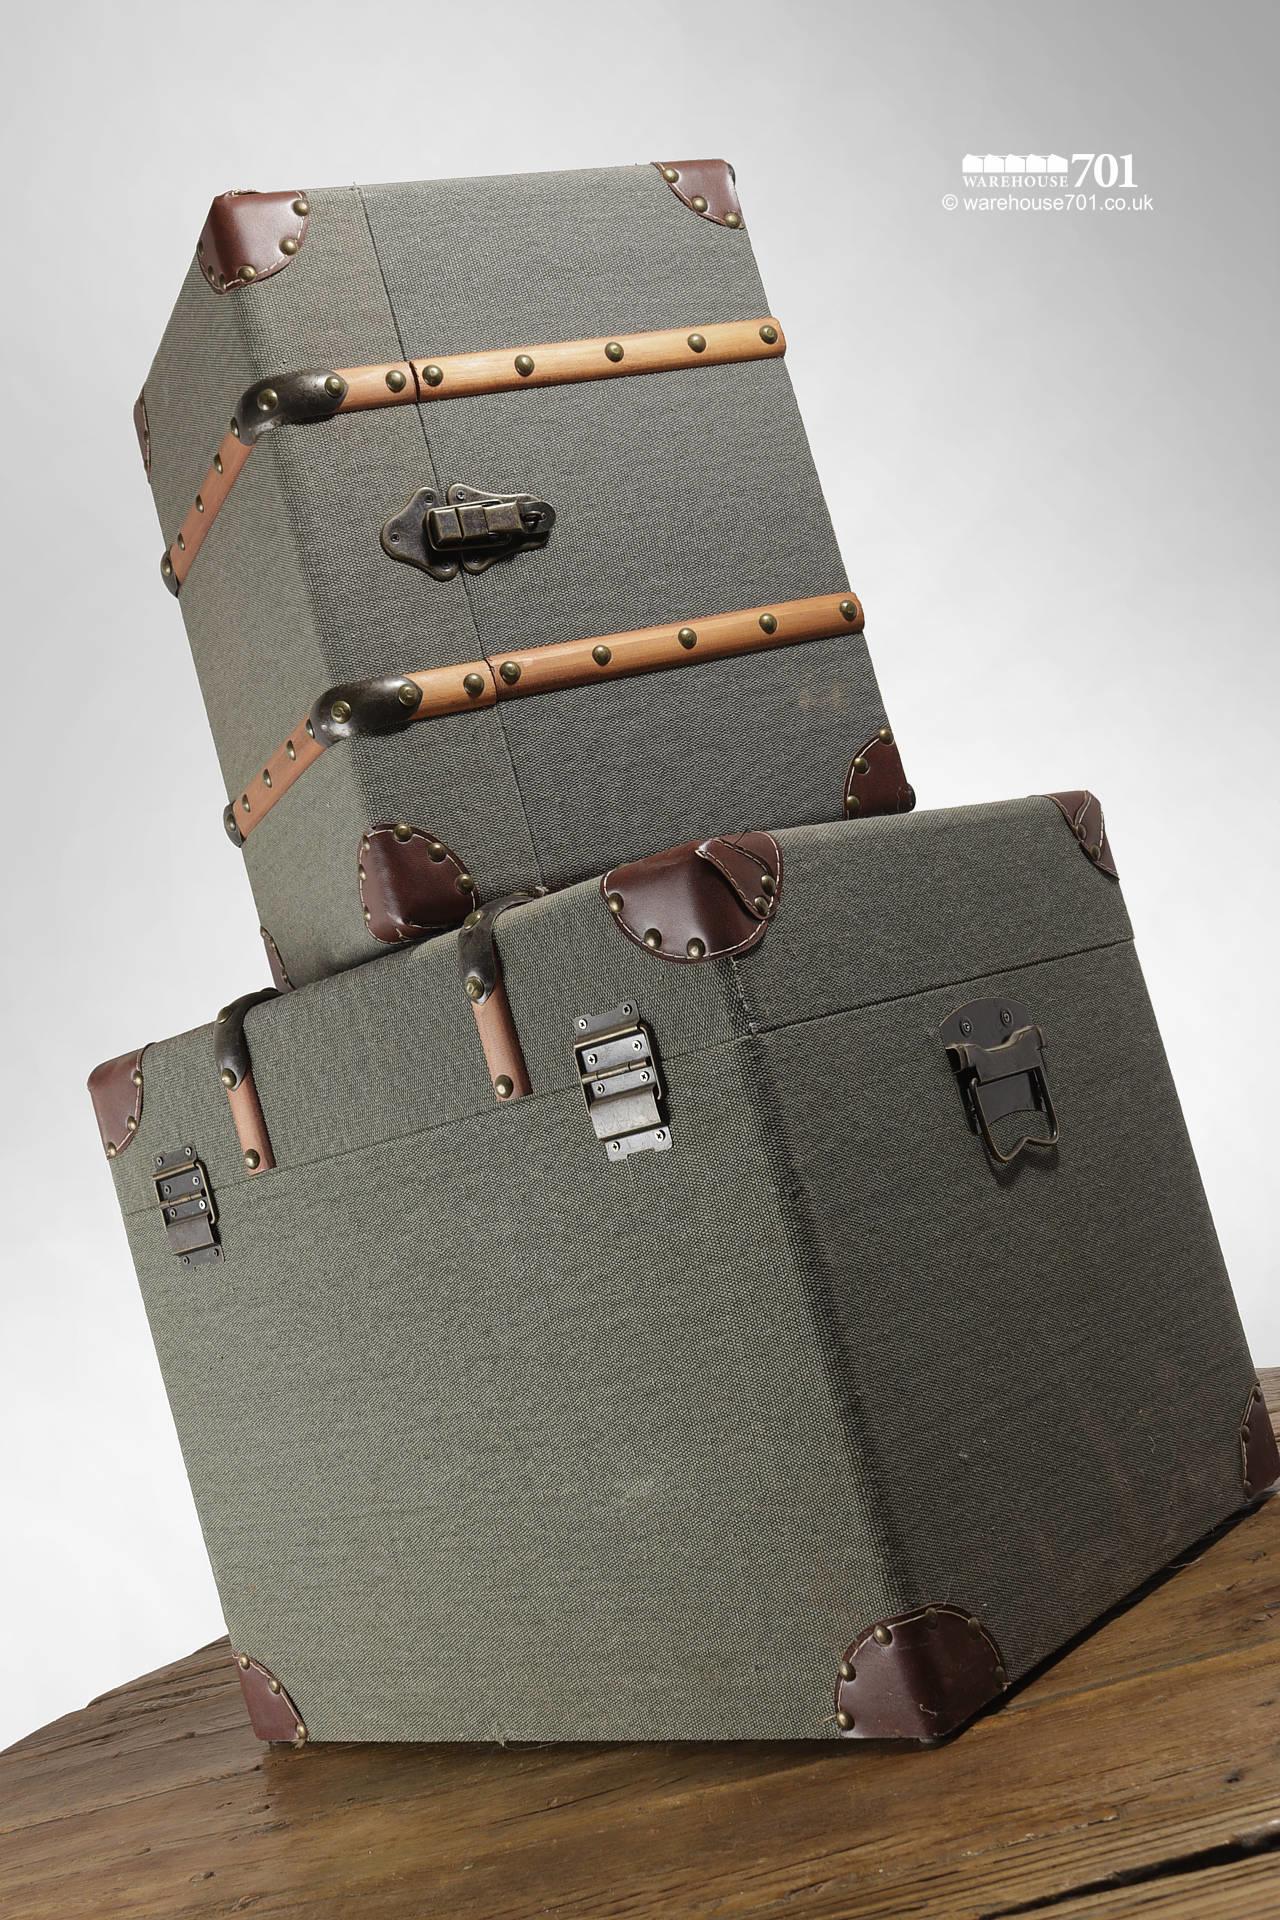 NEW Khaki Fabric Covered Storage Trunks with Leather and Wood Detailing #5